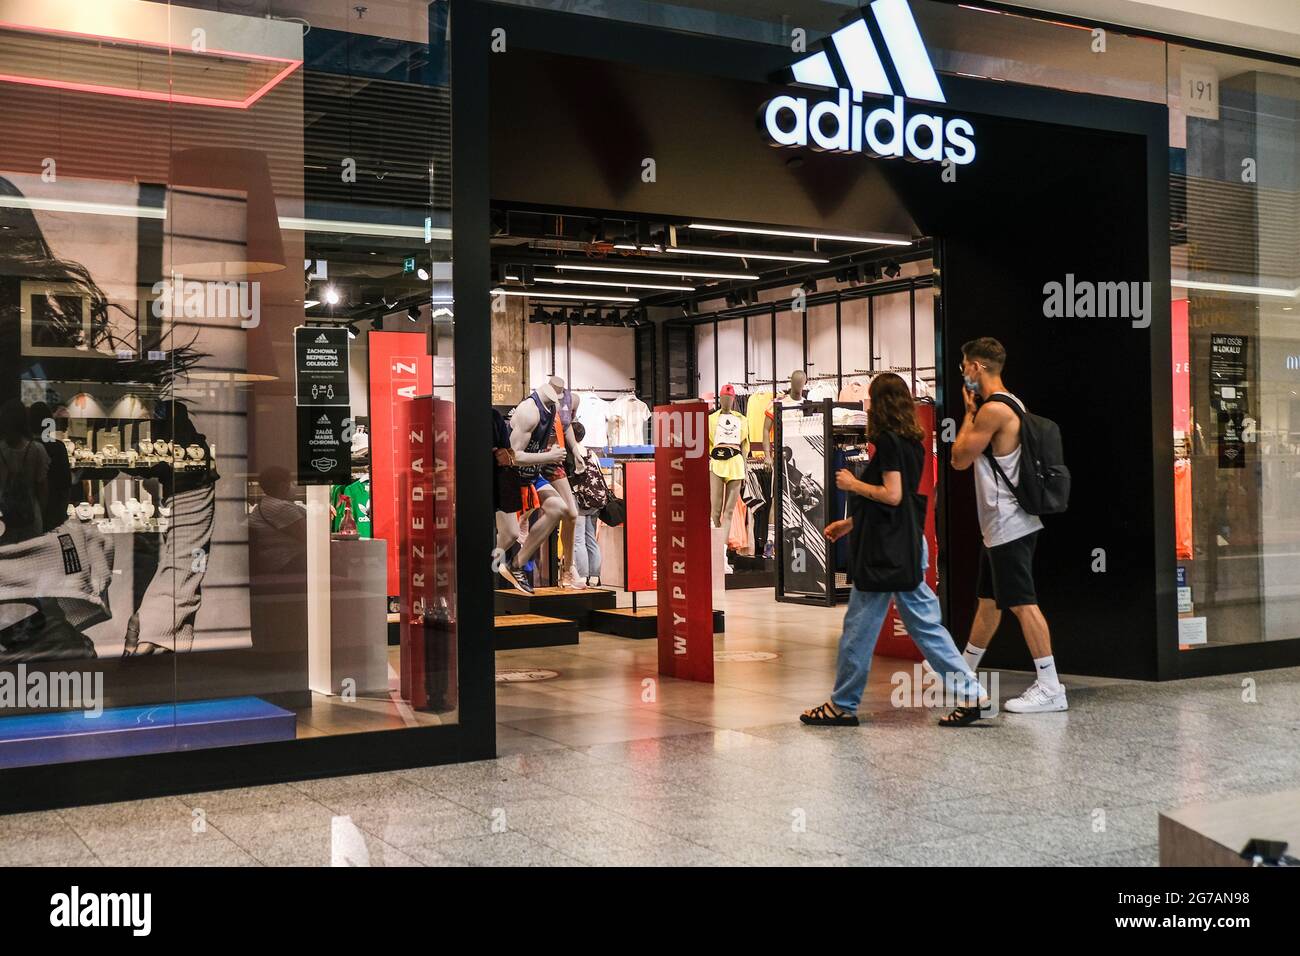 gasformig Legitim . Krakow, Poland. 12th July, 2021. People seen entering an Adidas shop inside  a shopping mall. (Photo by Omar Marques/SOPA Images/Sipa USA) Credit: Sipa  USA/Alamy Live News Stock Photo - Alamy